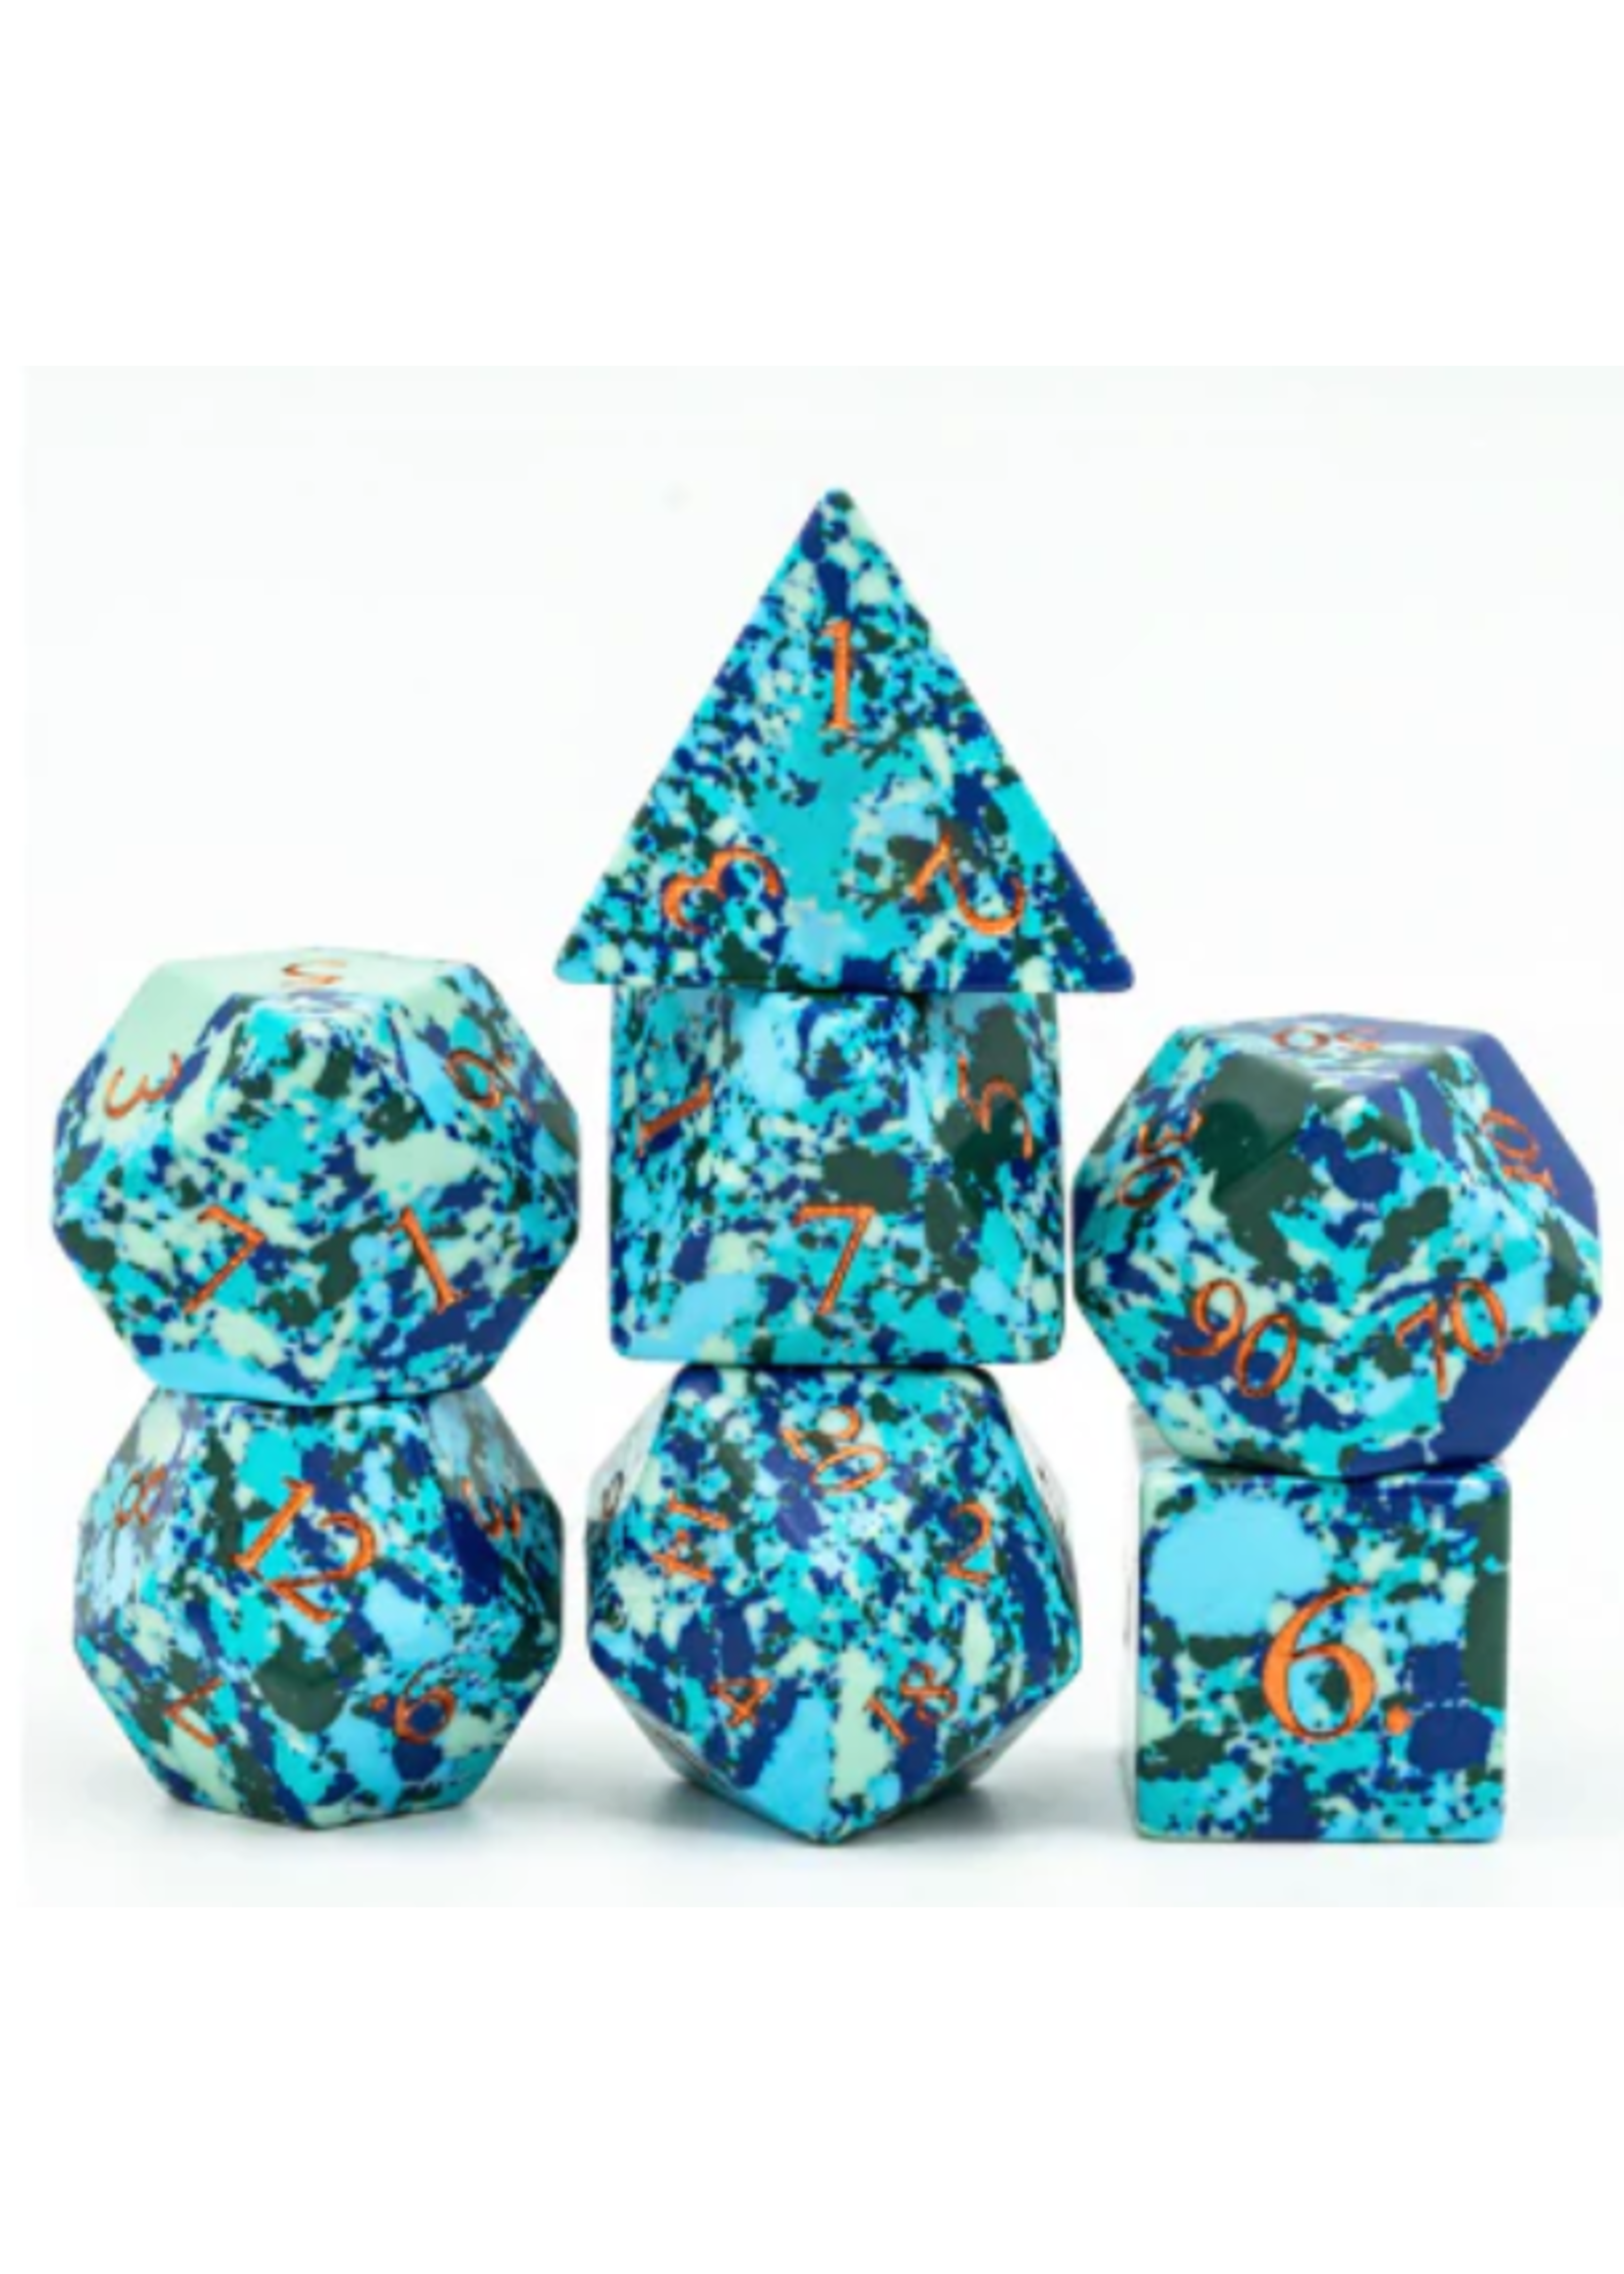 Foam Brain Textured Turquoise Speckled Blue 7 set dice- Engraved